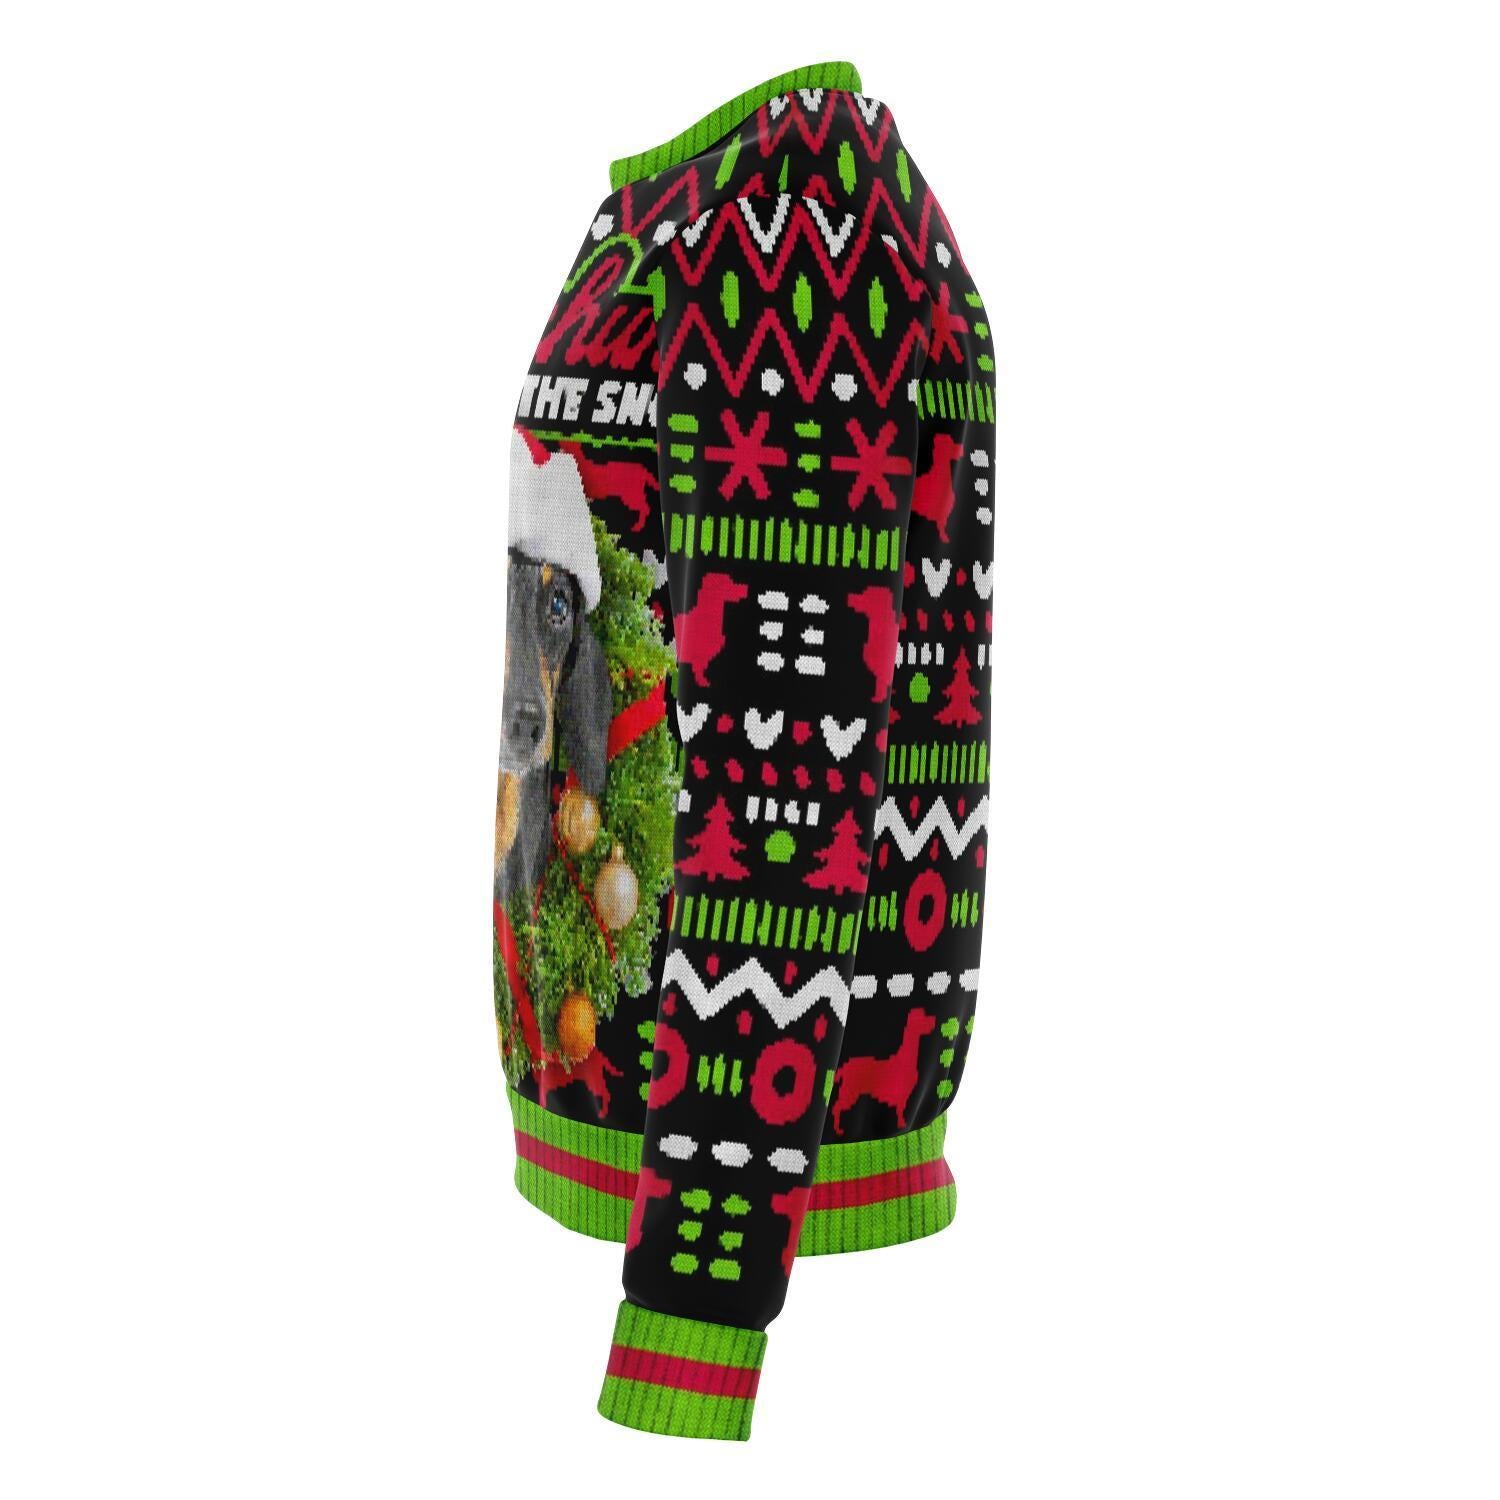 Dachshund Through The Snow Christmas Ugly Sweater-grizzshop